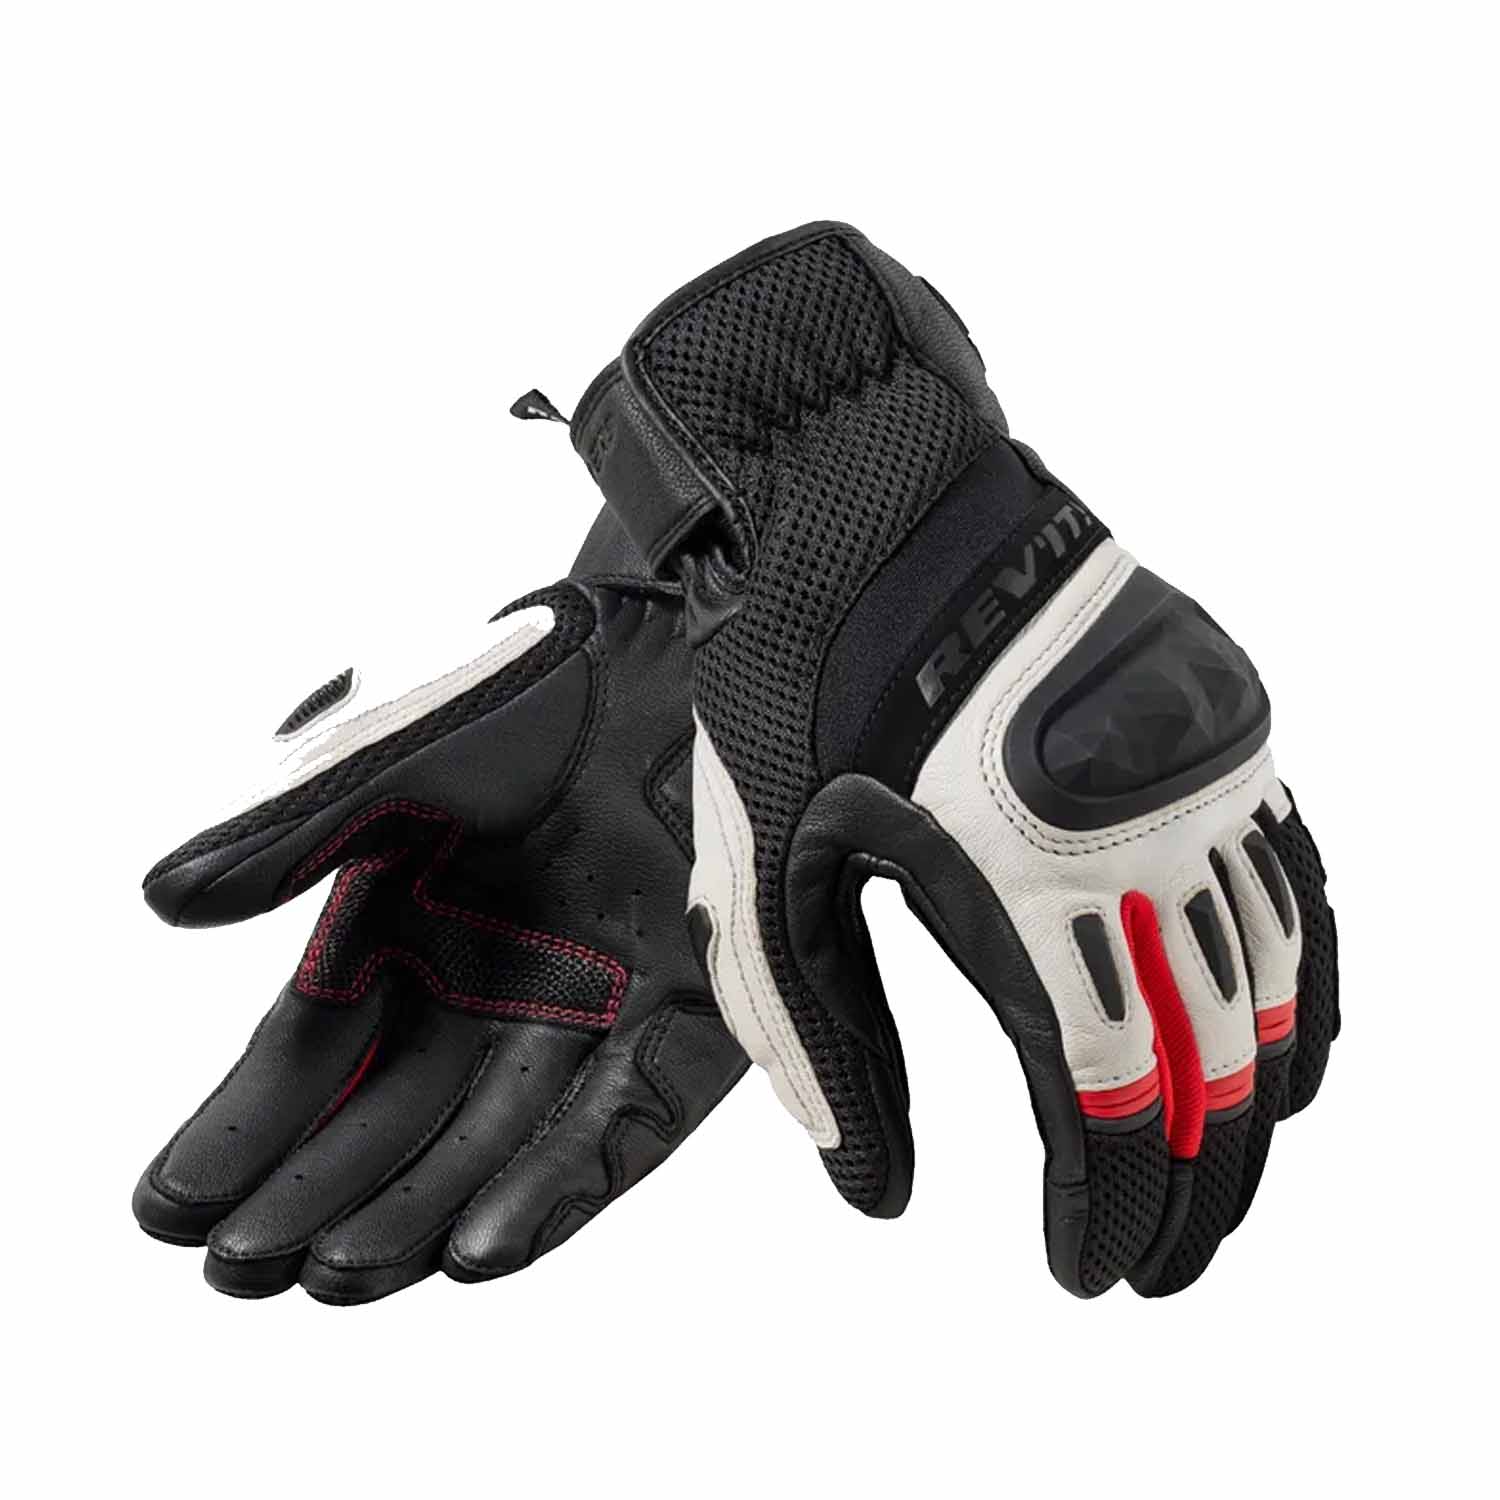 Image of EU REV'IT! Dirt 4 Gloves Black Red Taille M